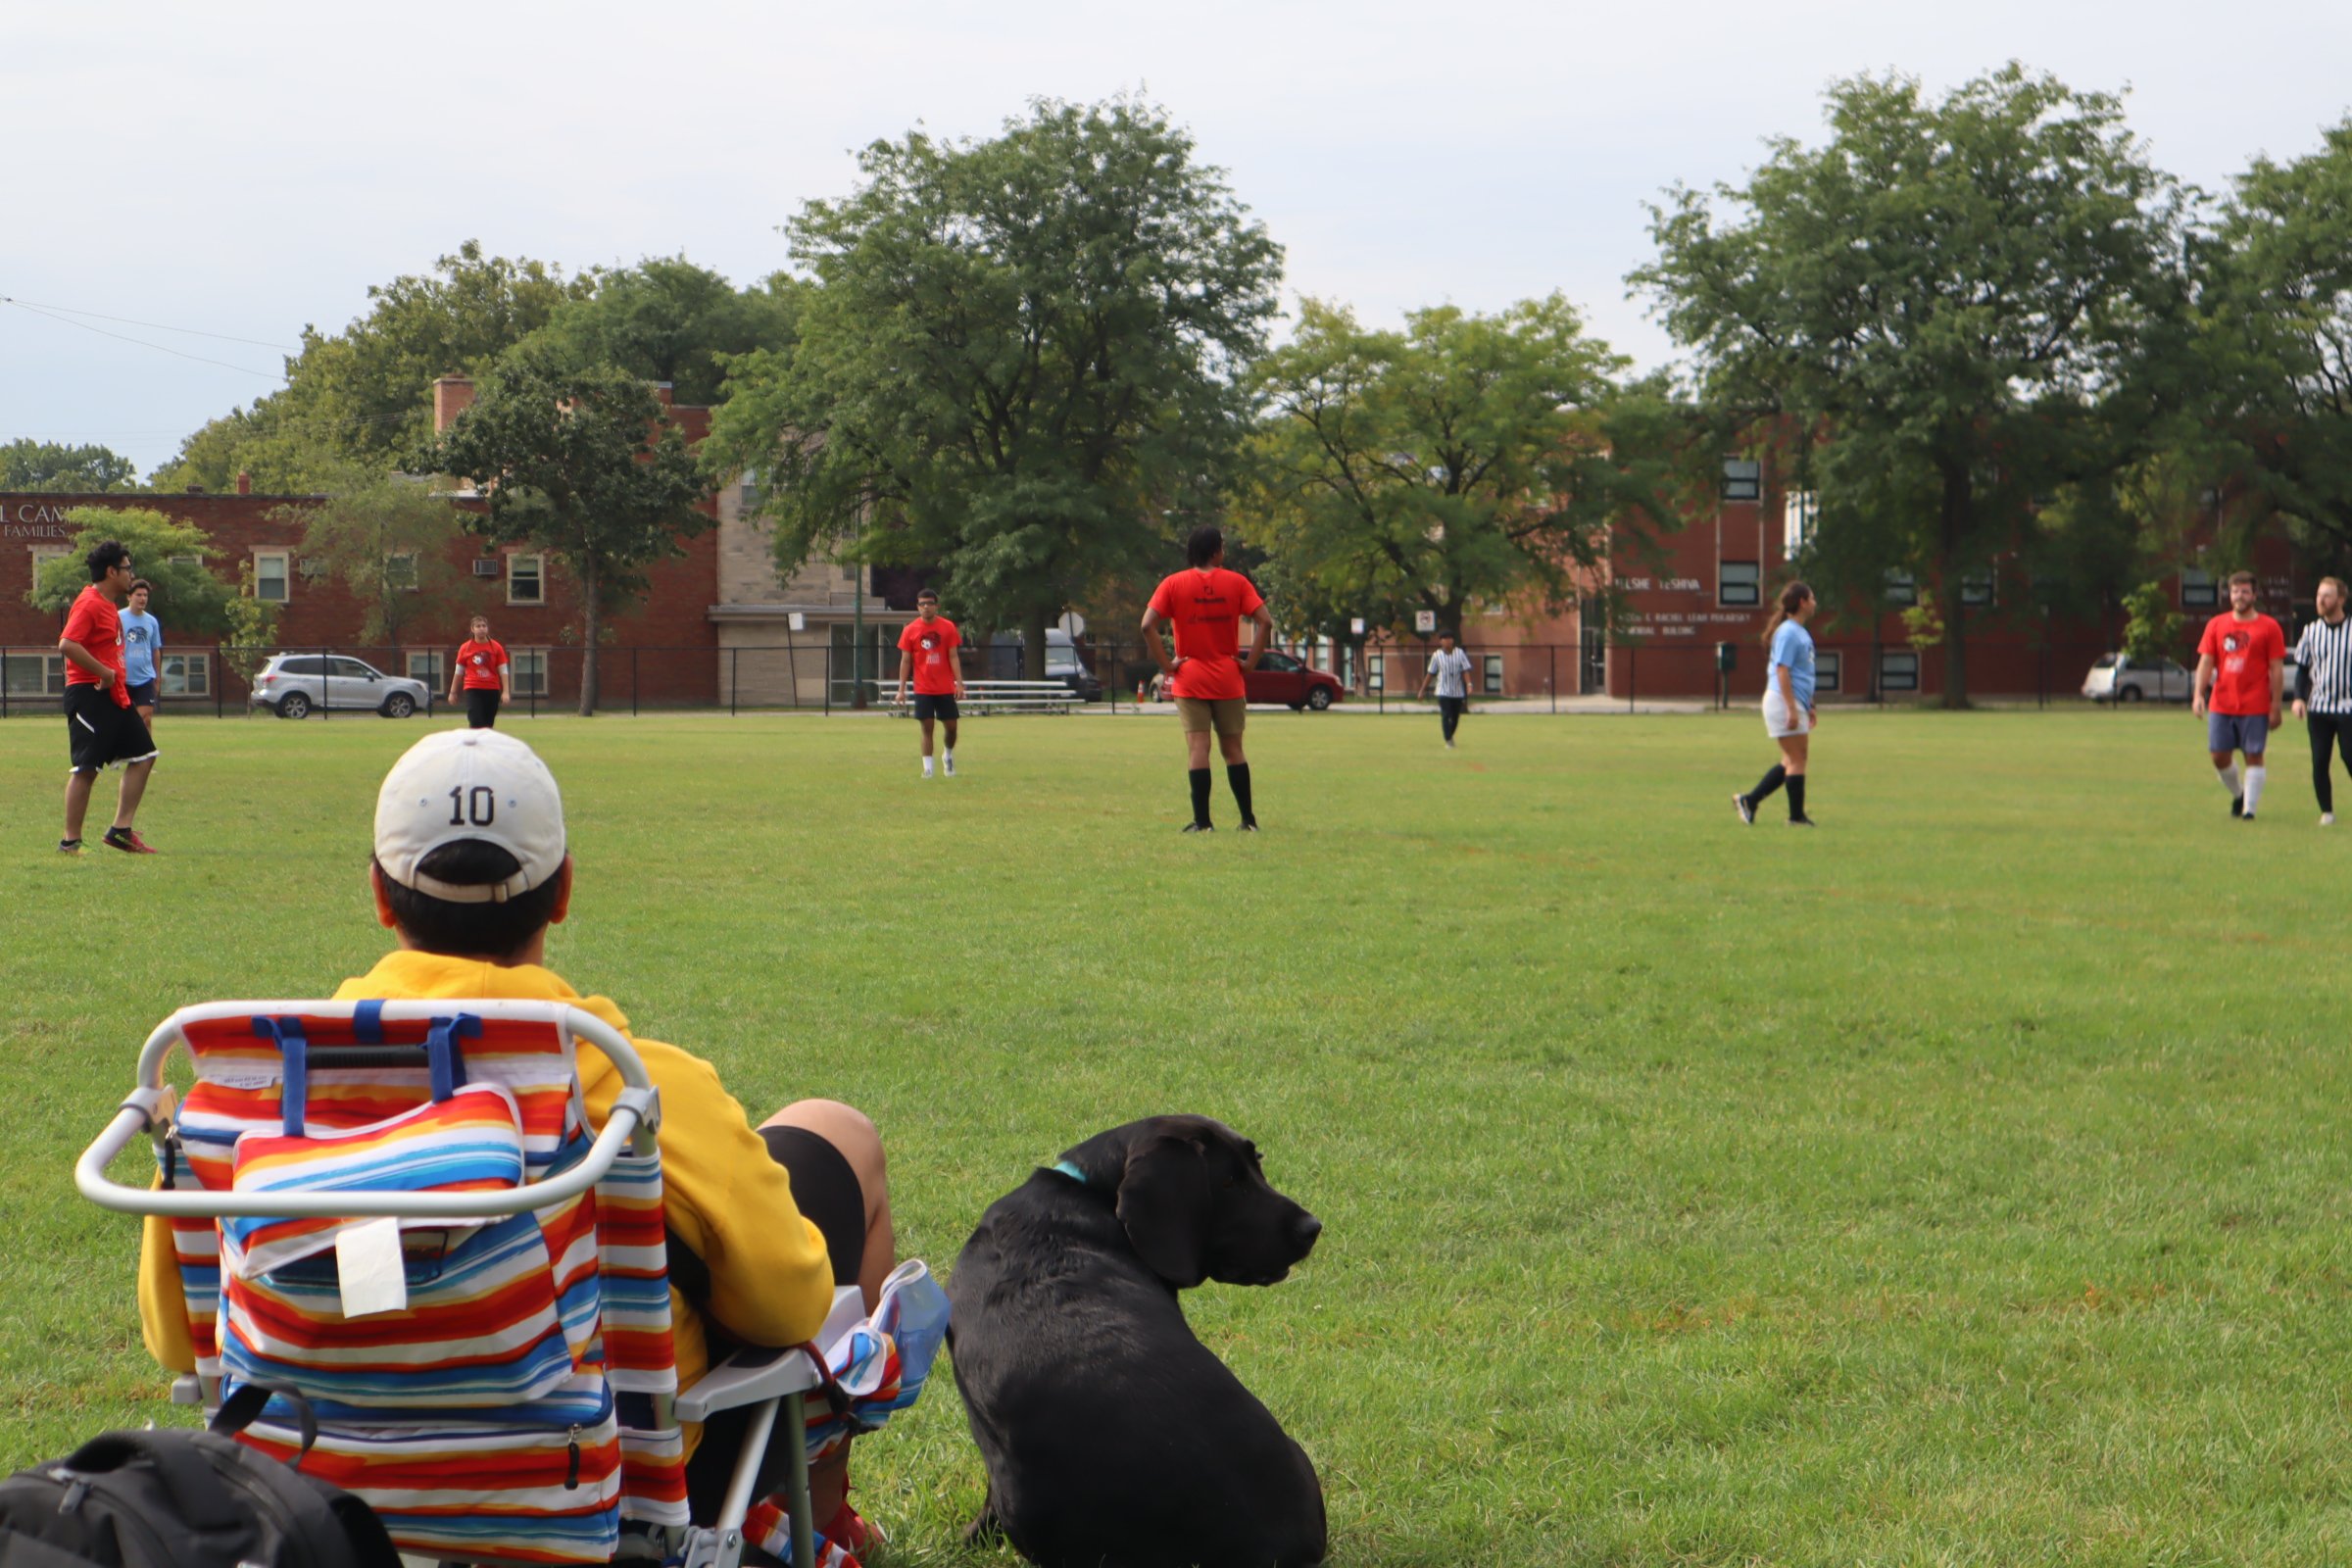 Community member and his dog watching soccer